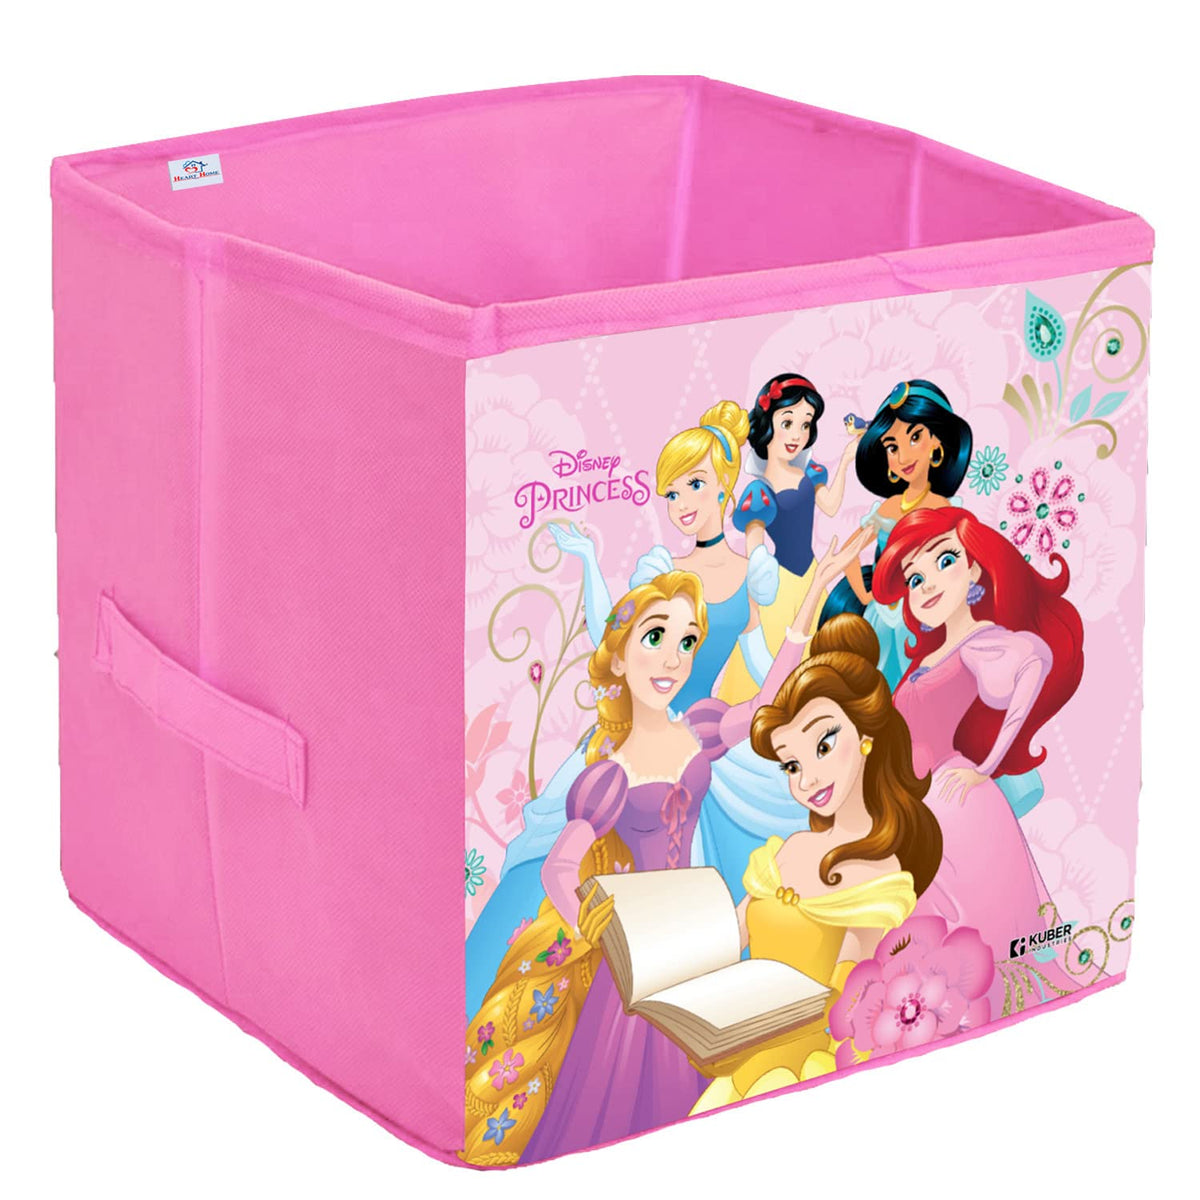 Heart Home Disney Princess Print Storage Box|Foldable Clothes Organizer|Collapsible Storage Basket With Handle For Toys,Books,30 Ltr.(Pink)